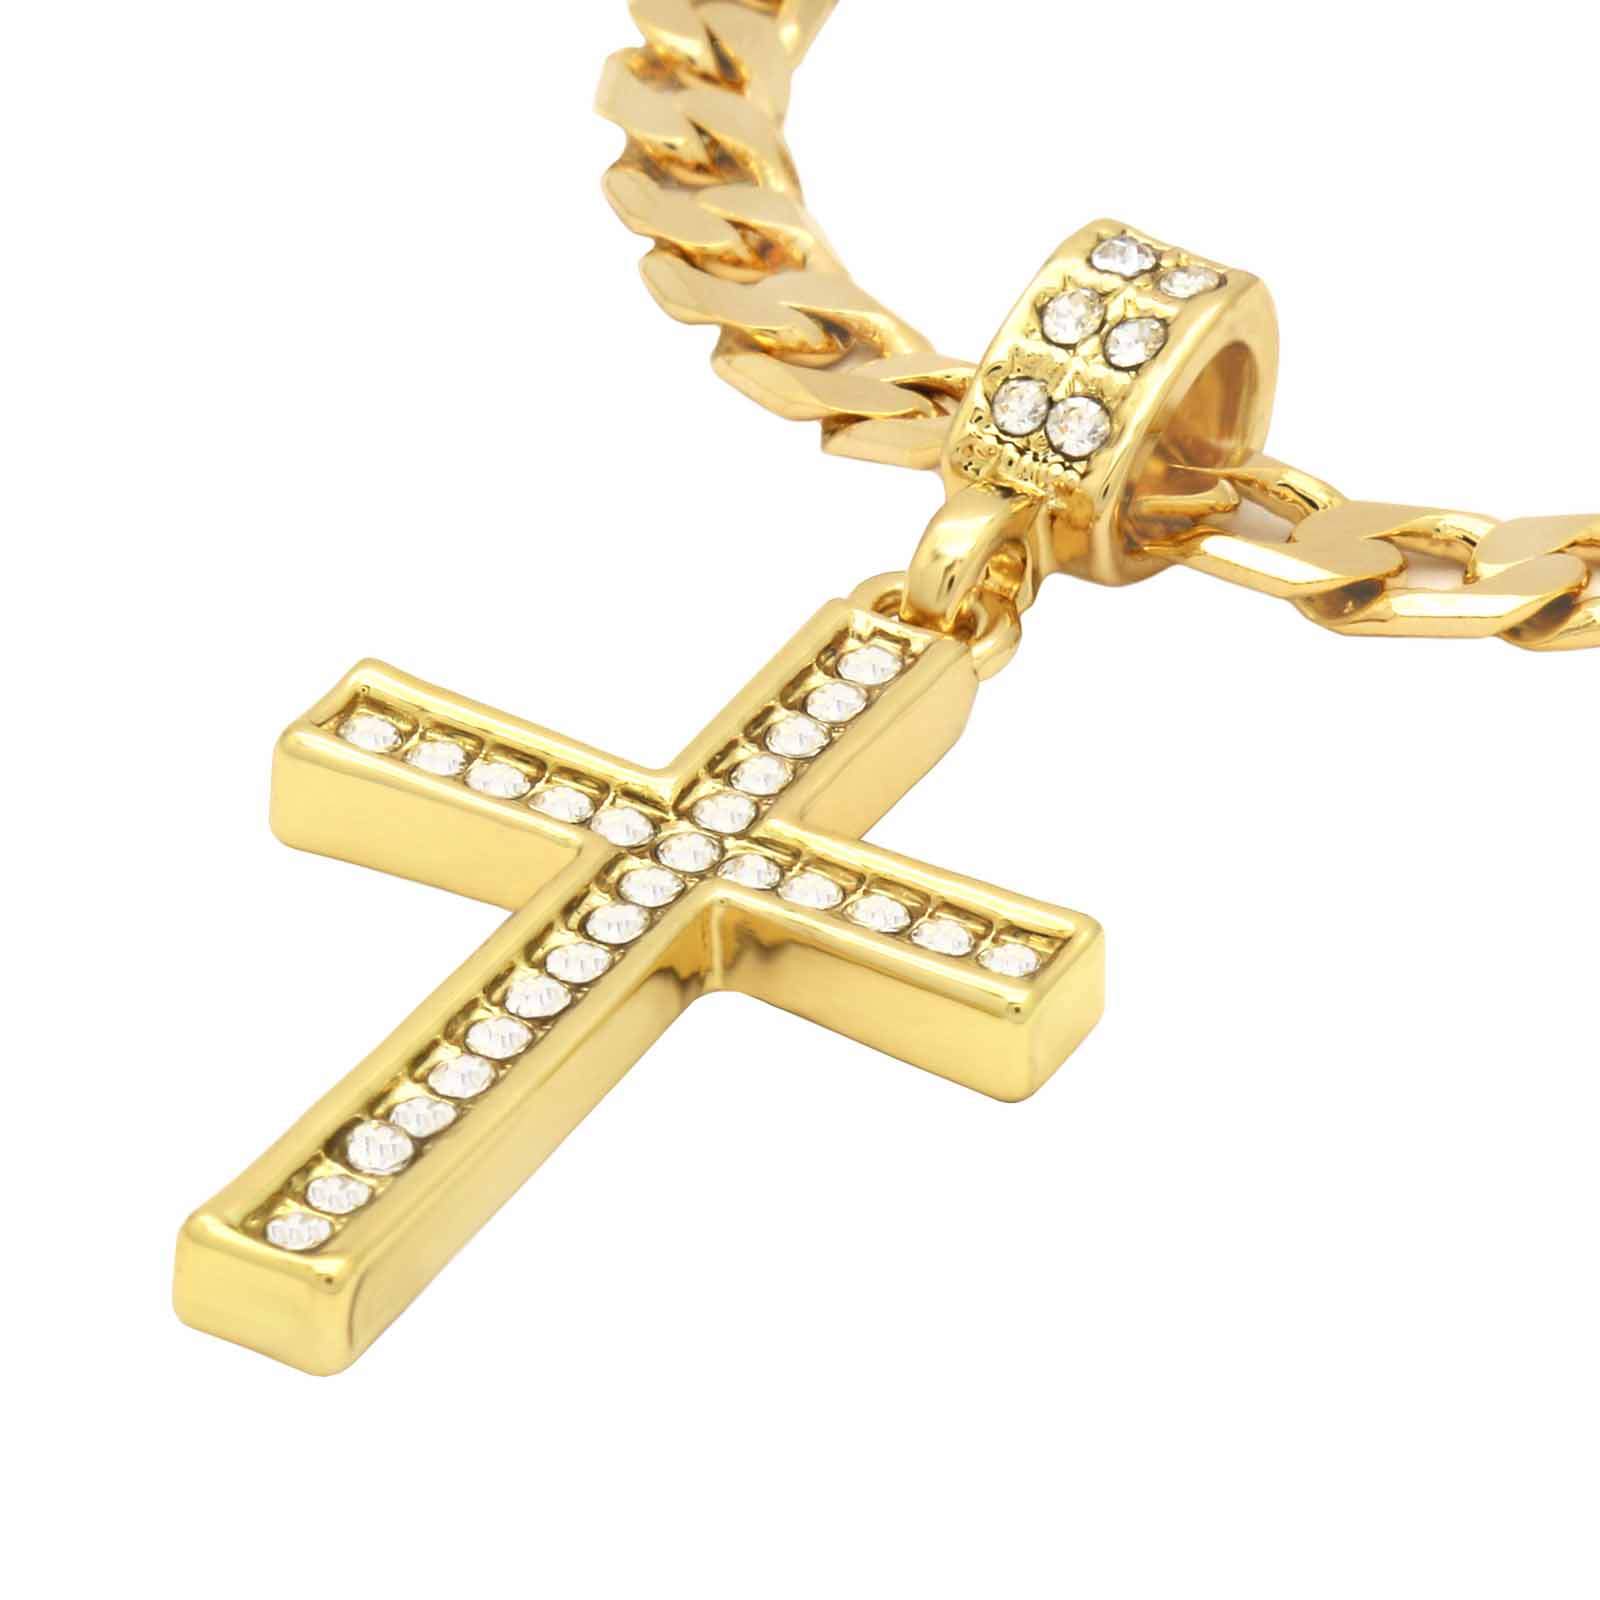 The Cz Cross Necklace 8